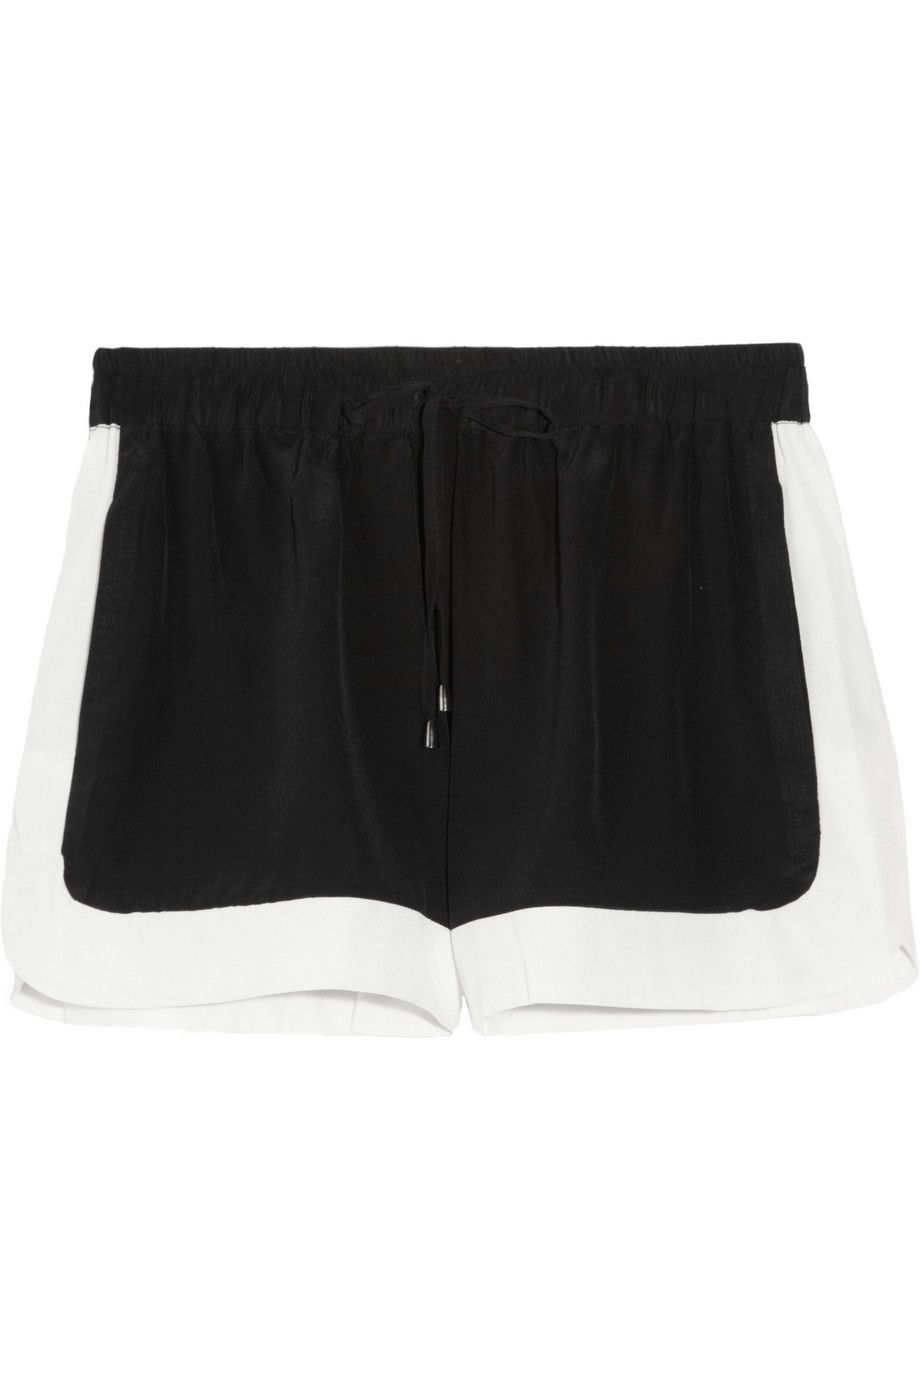 Textile, White, Style, Shorts, Light, Black, Active shorts, Trunks, Space, Black-and-white, 